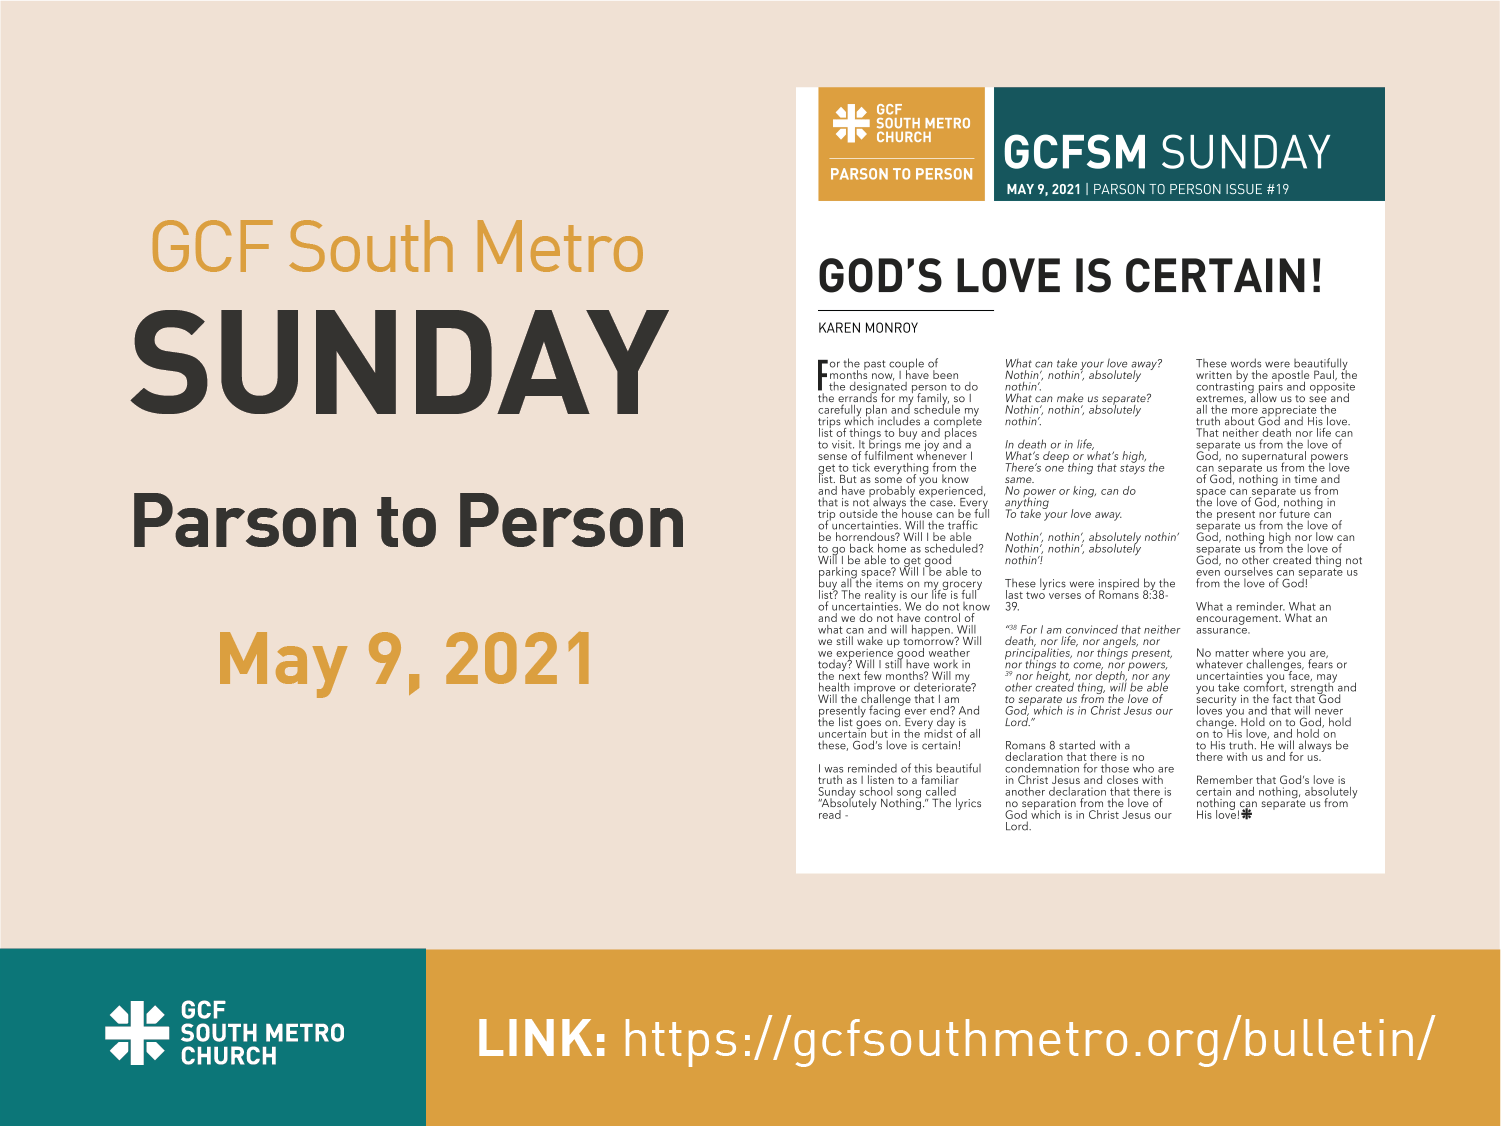 Sunday Bulletin – Parson to Person, May 9, 2021